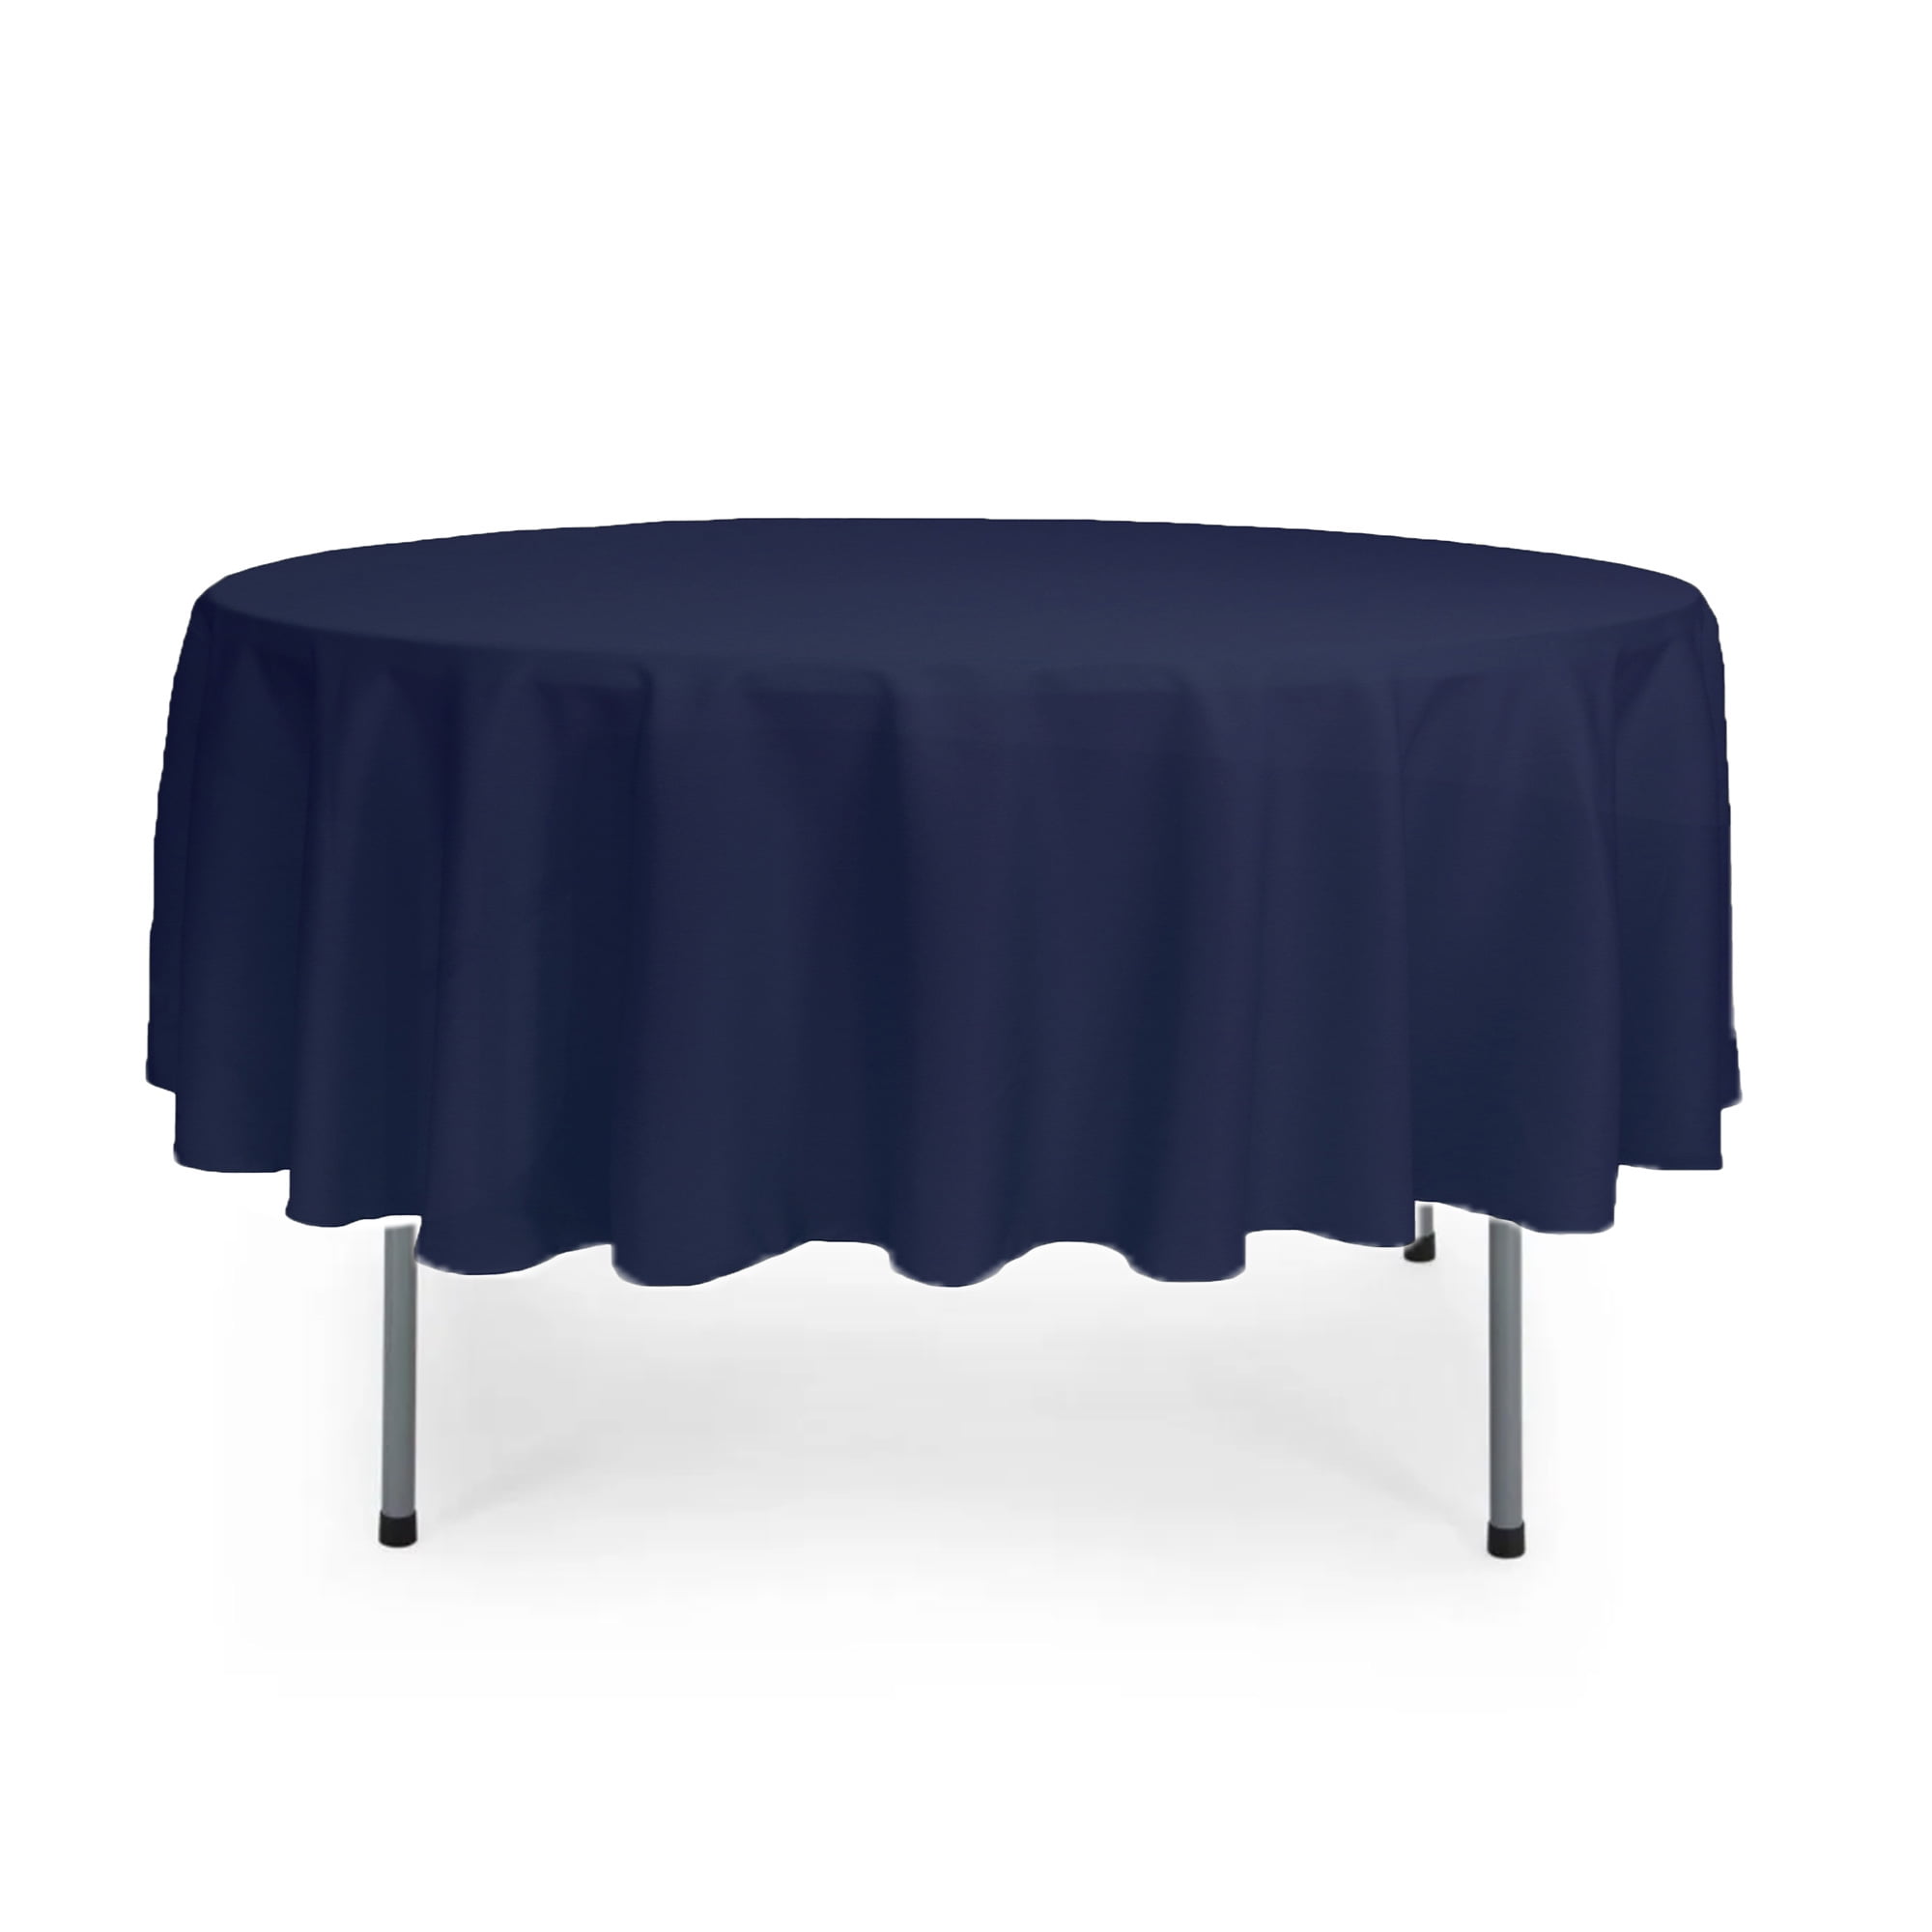 90 Inch Round Polyester Tablecloth Navy, How Many Chairs Fit Around A 32 Round Tablecloth